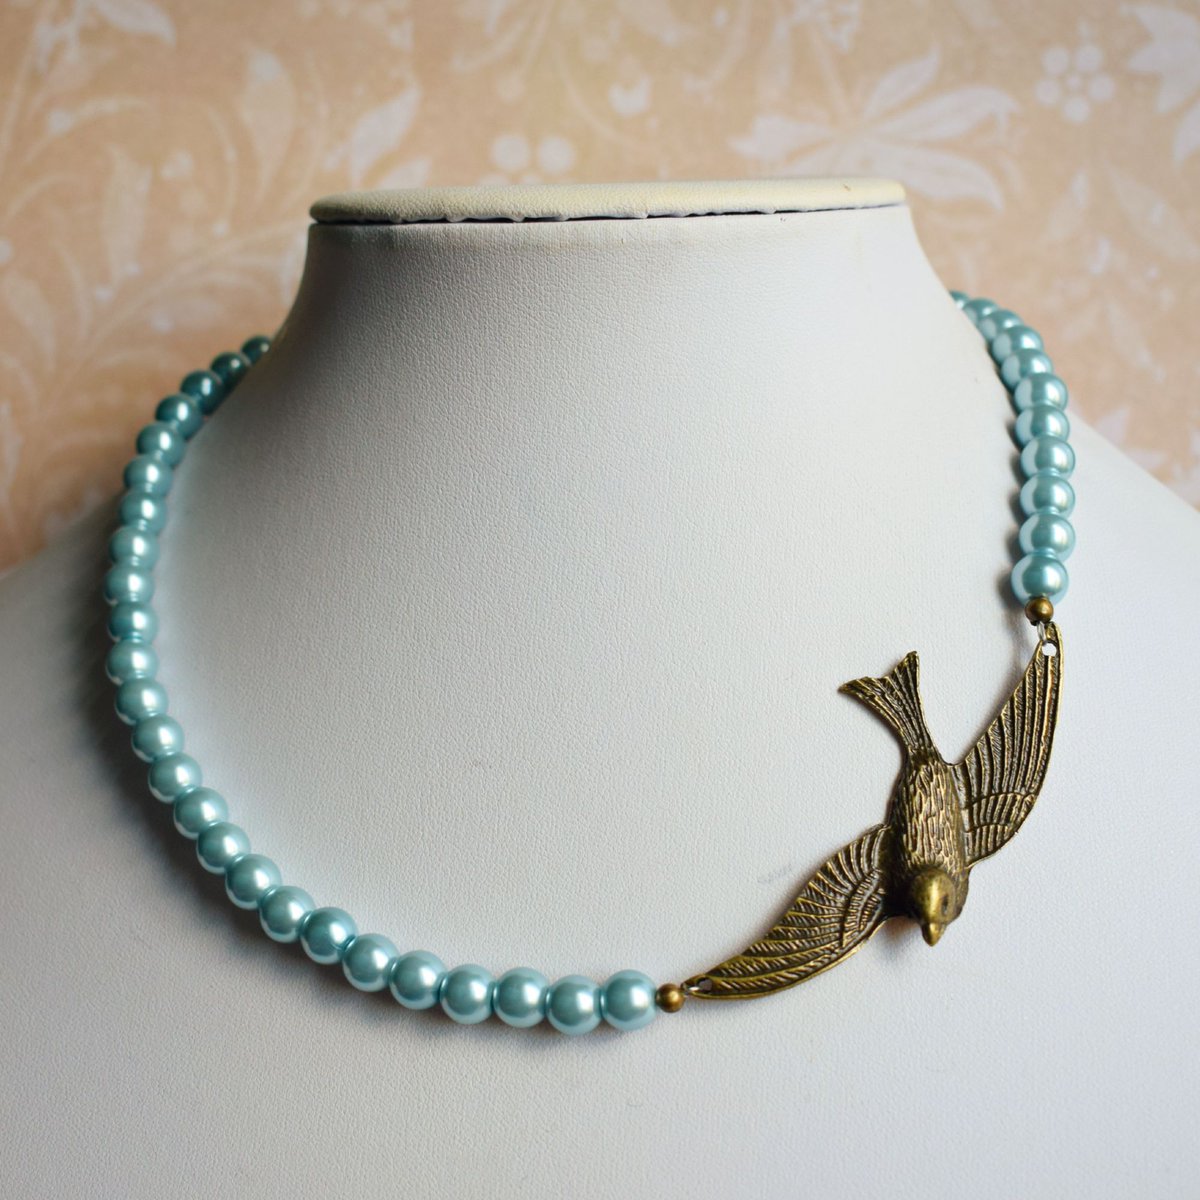 If you love vintage style jewellery then this swallow necklace could be just the thing!

#necklace #vintagestyle #folksyseller #handmadegift 

folksy.com/items/8303787-…